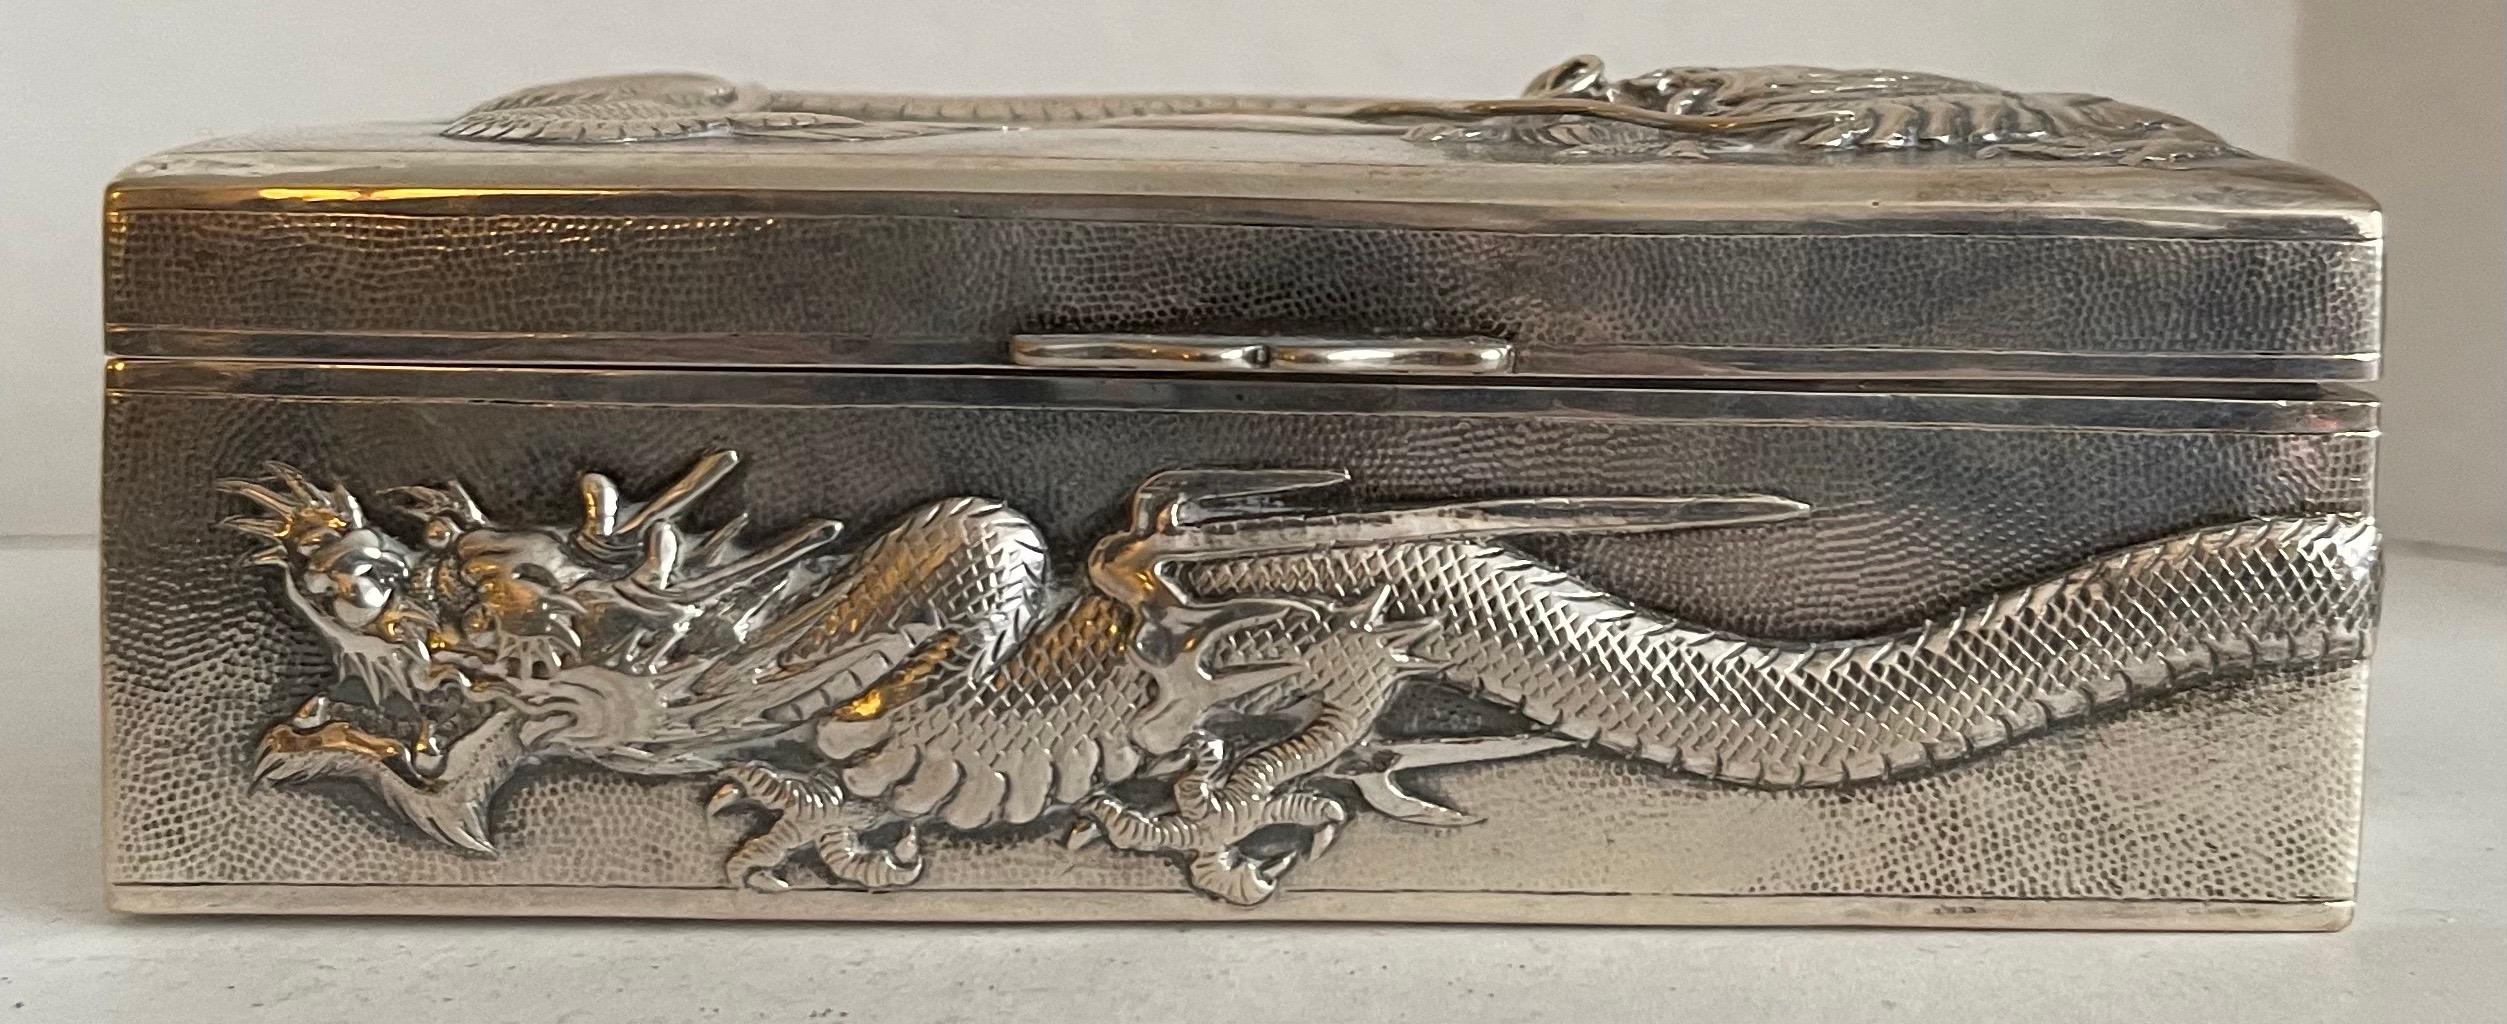 Repoussé 19th Century Chinese Export Silver Dragon Cigar Box For Sale